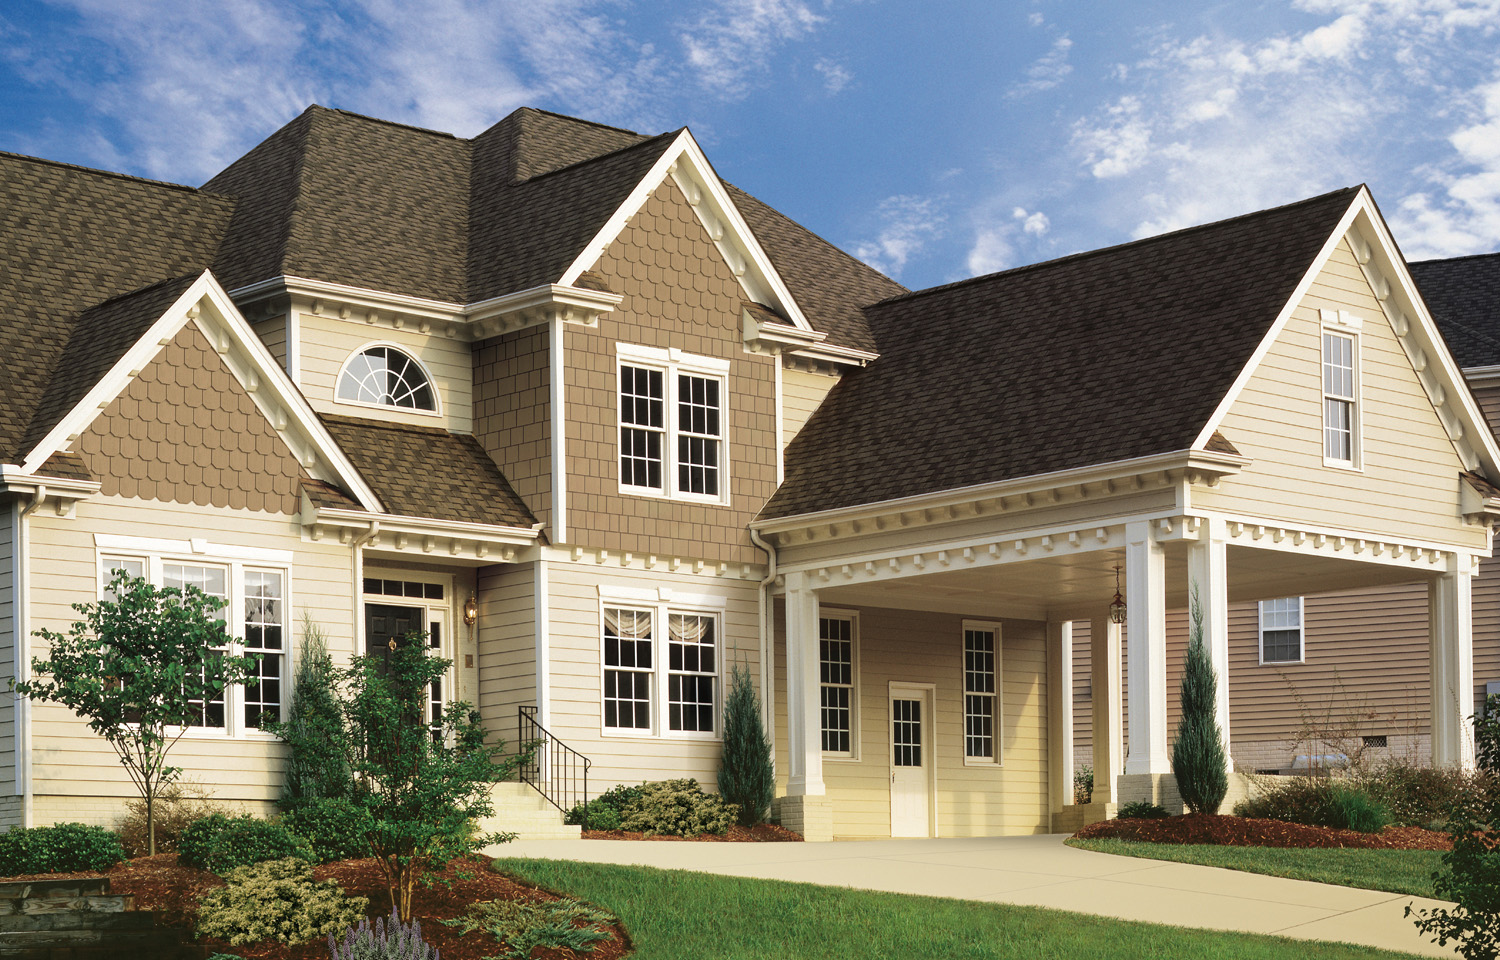 Multiplicity - Types of Exterior House Siding Ideas